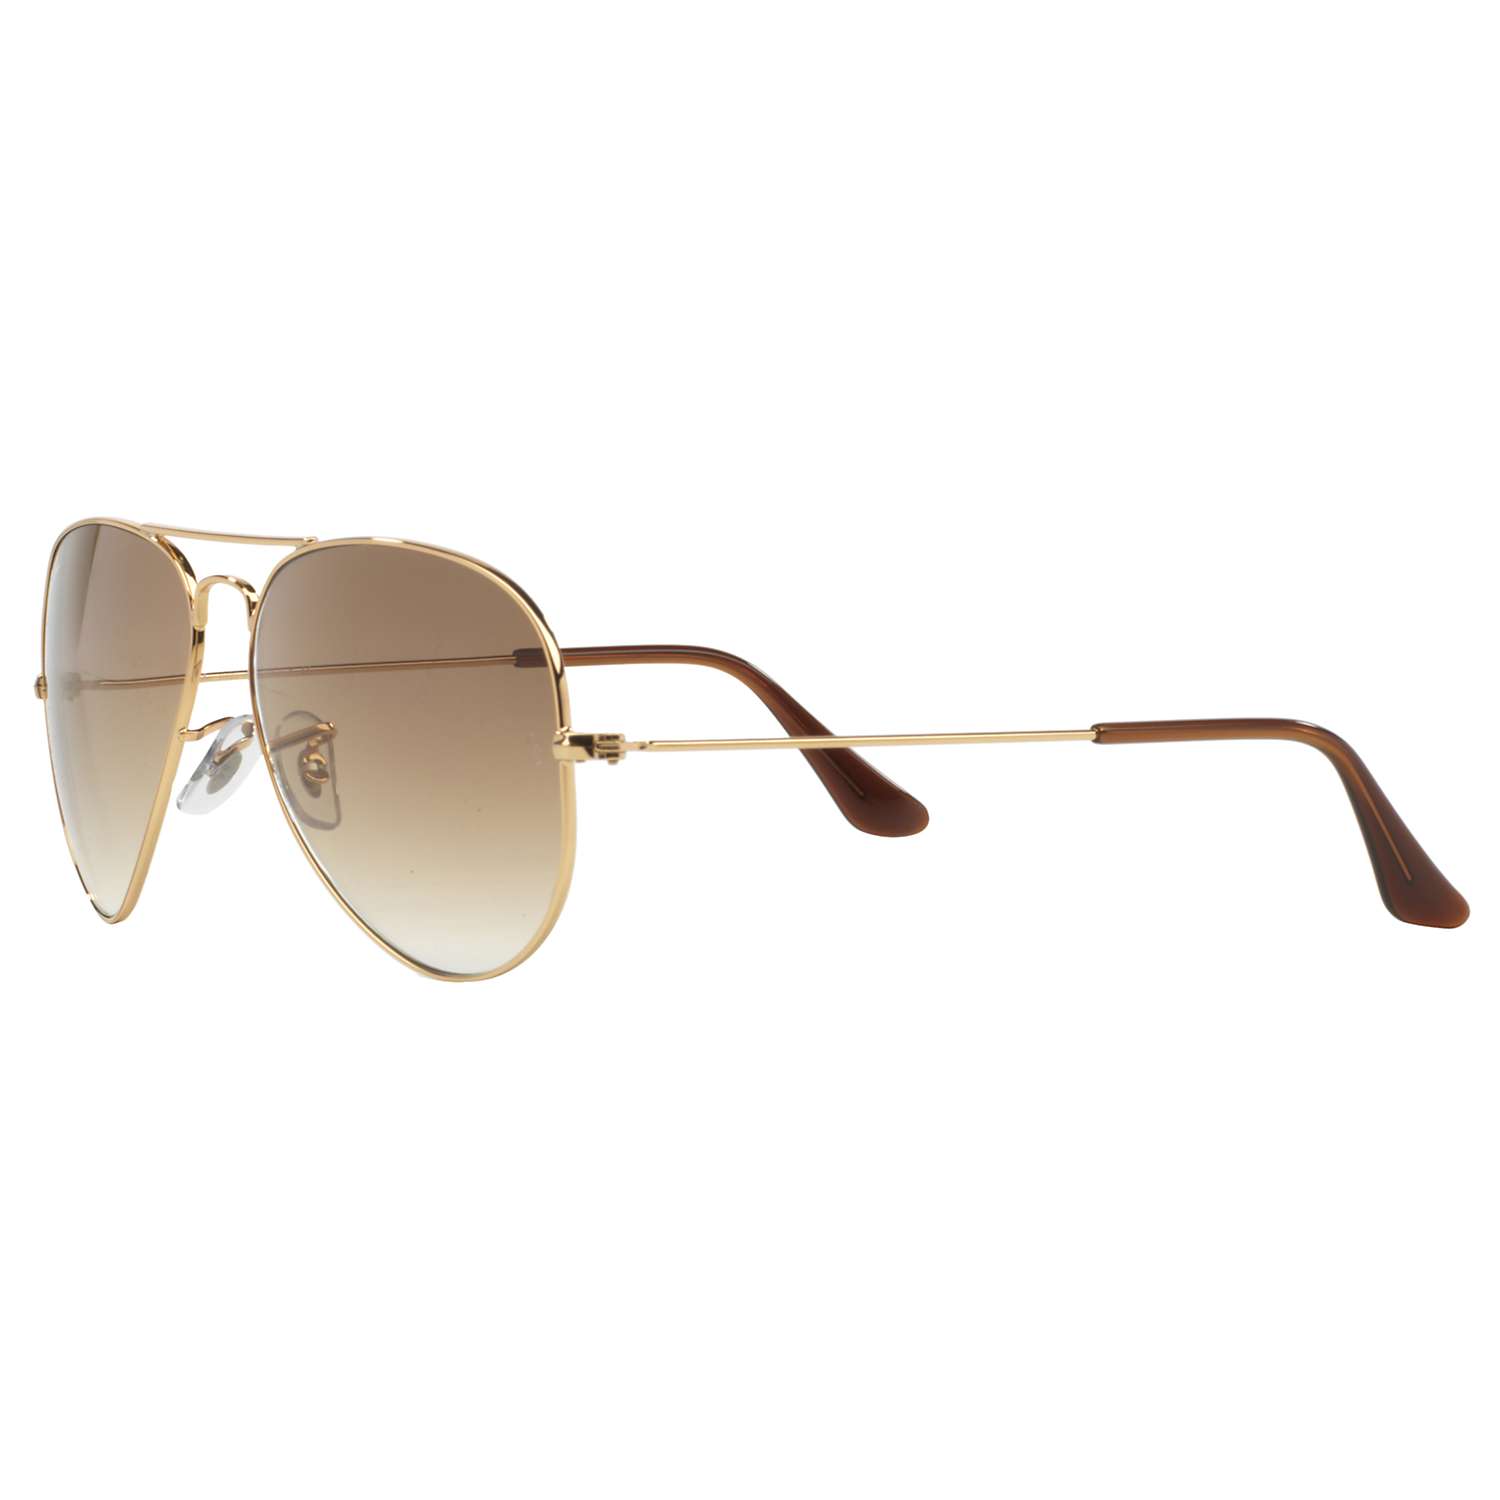 Buy Ray-Ban RB3025 Aviator Sunglasses Online at johnlewis.com